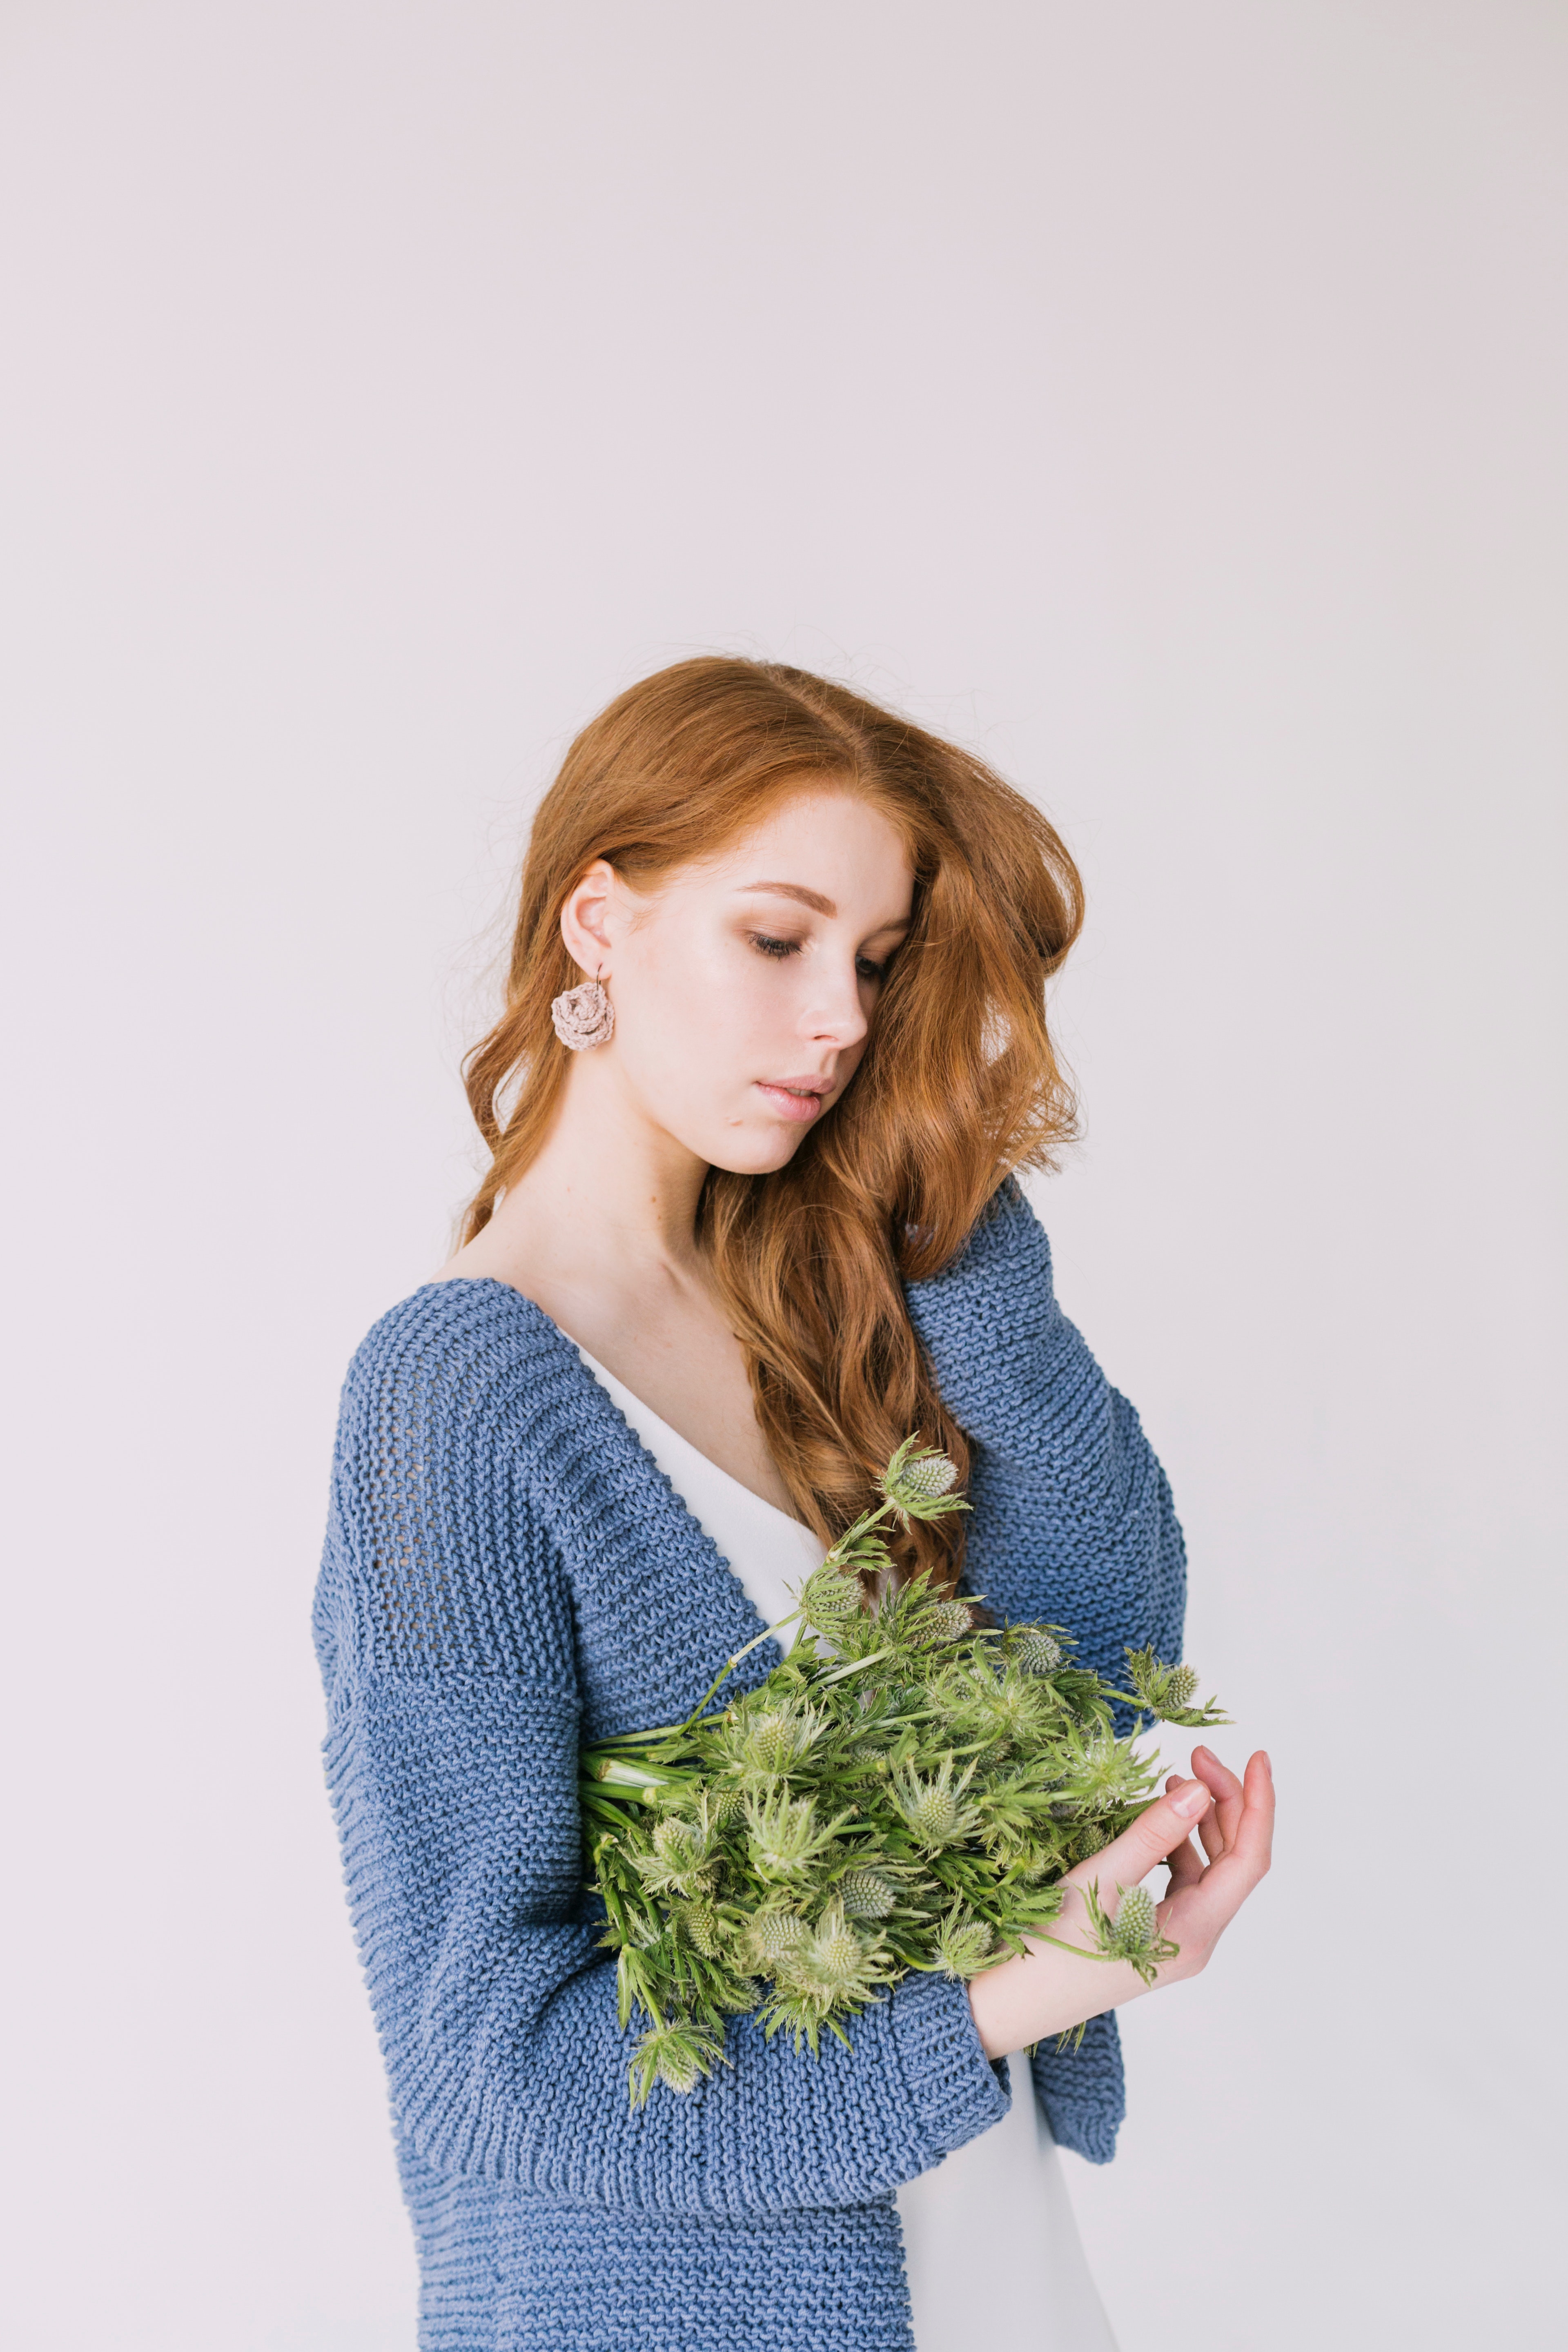 Woman in blue cardigan holding green flowers photo